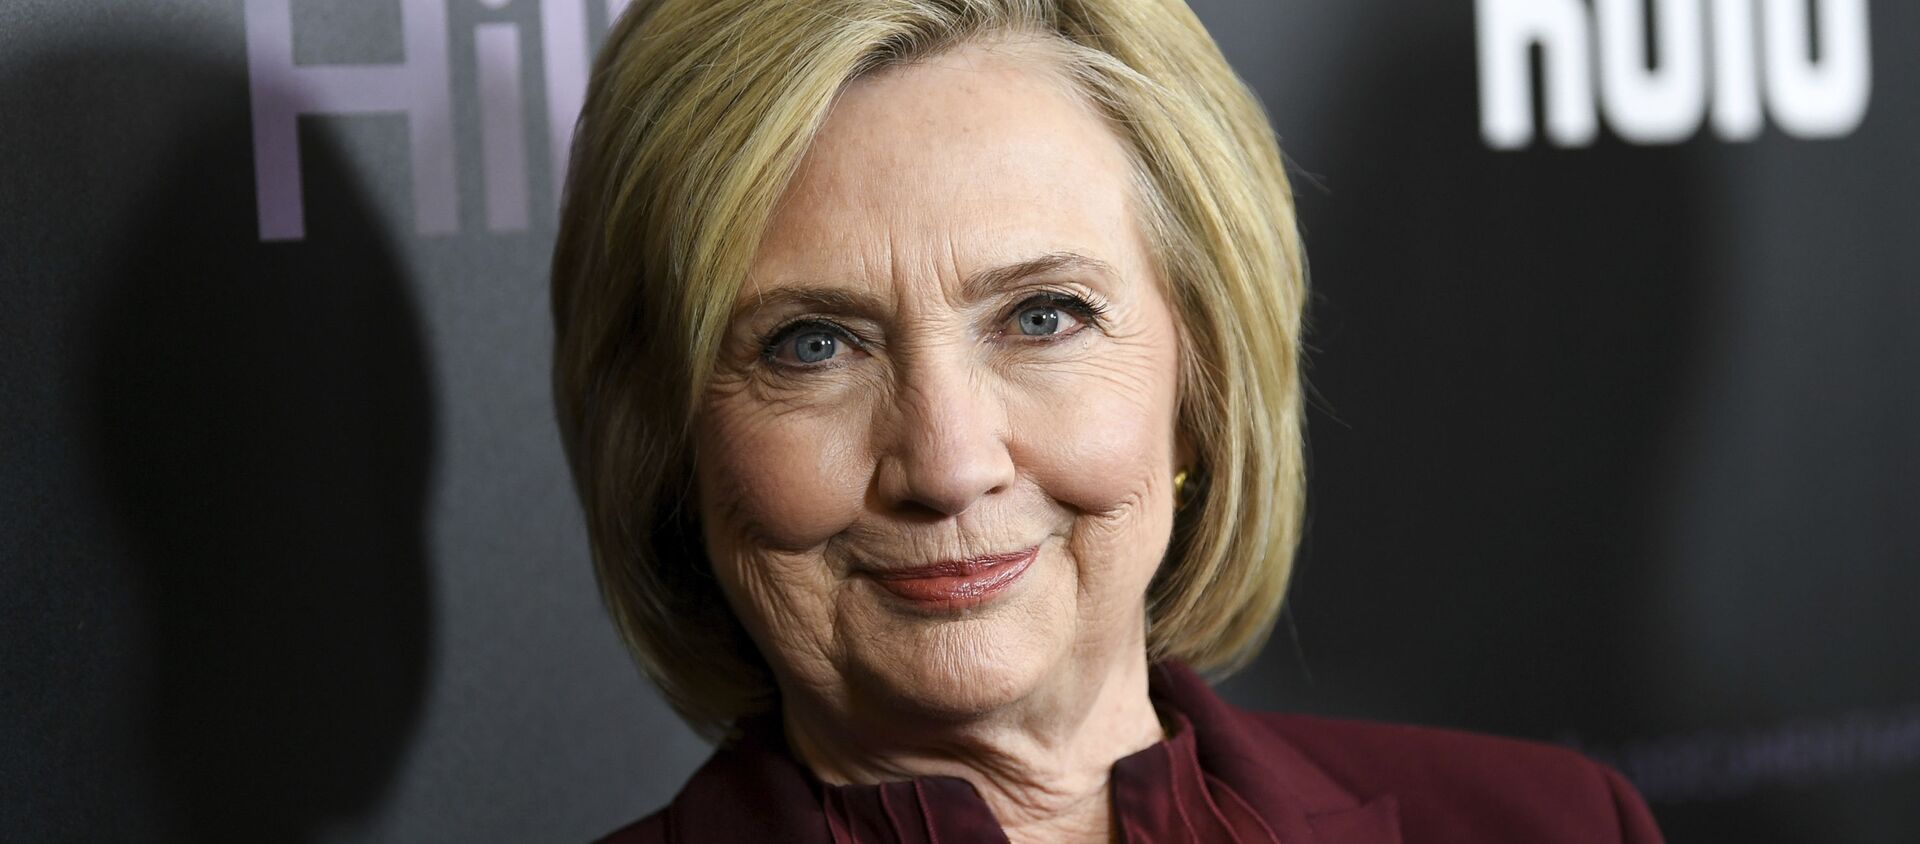 Former secretary of state Hillary Clinton attends the premiere of the Hulu documentary Hillary at the DGA New York Theater on Wednesday, March 4, 2020, in New York - Sputnik International, 1920, 26.02.2021